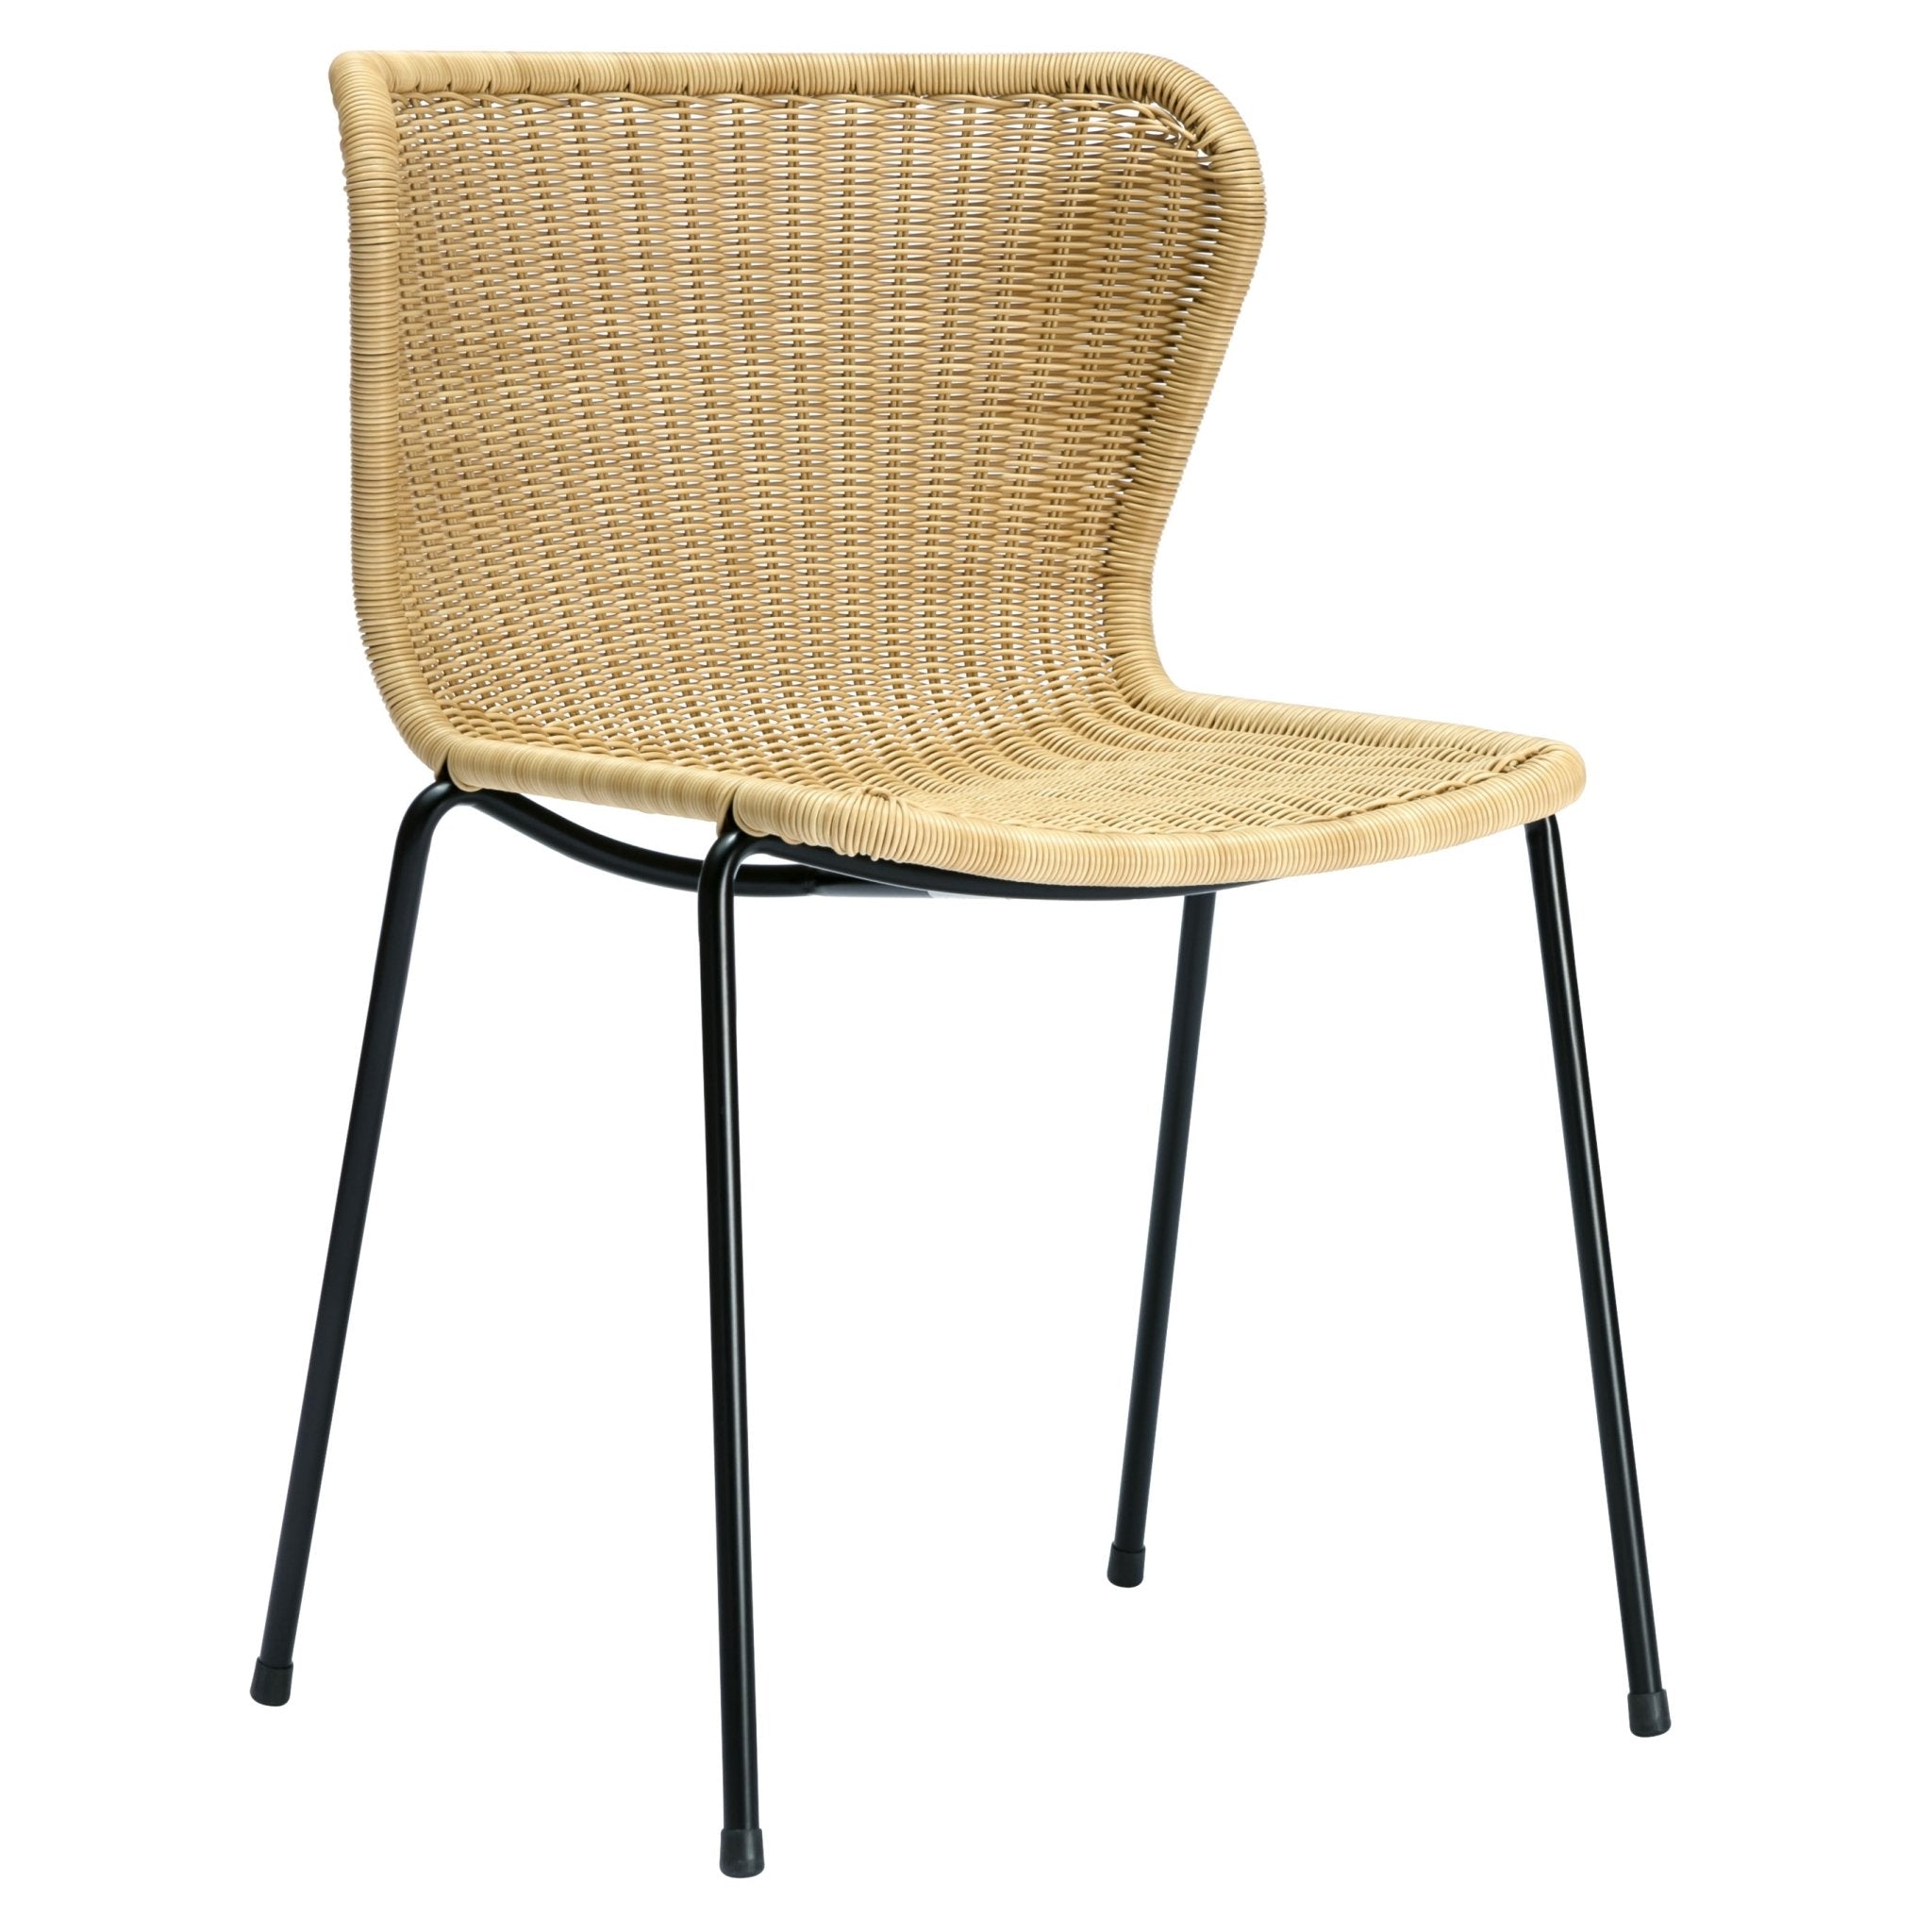 C603 Outdoor Dining Chair - Wheat